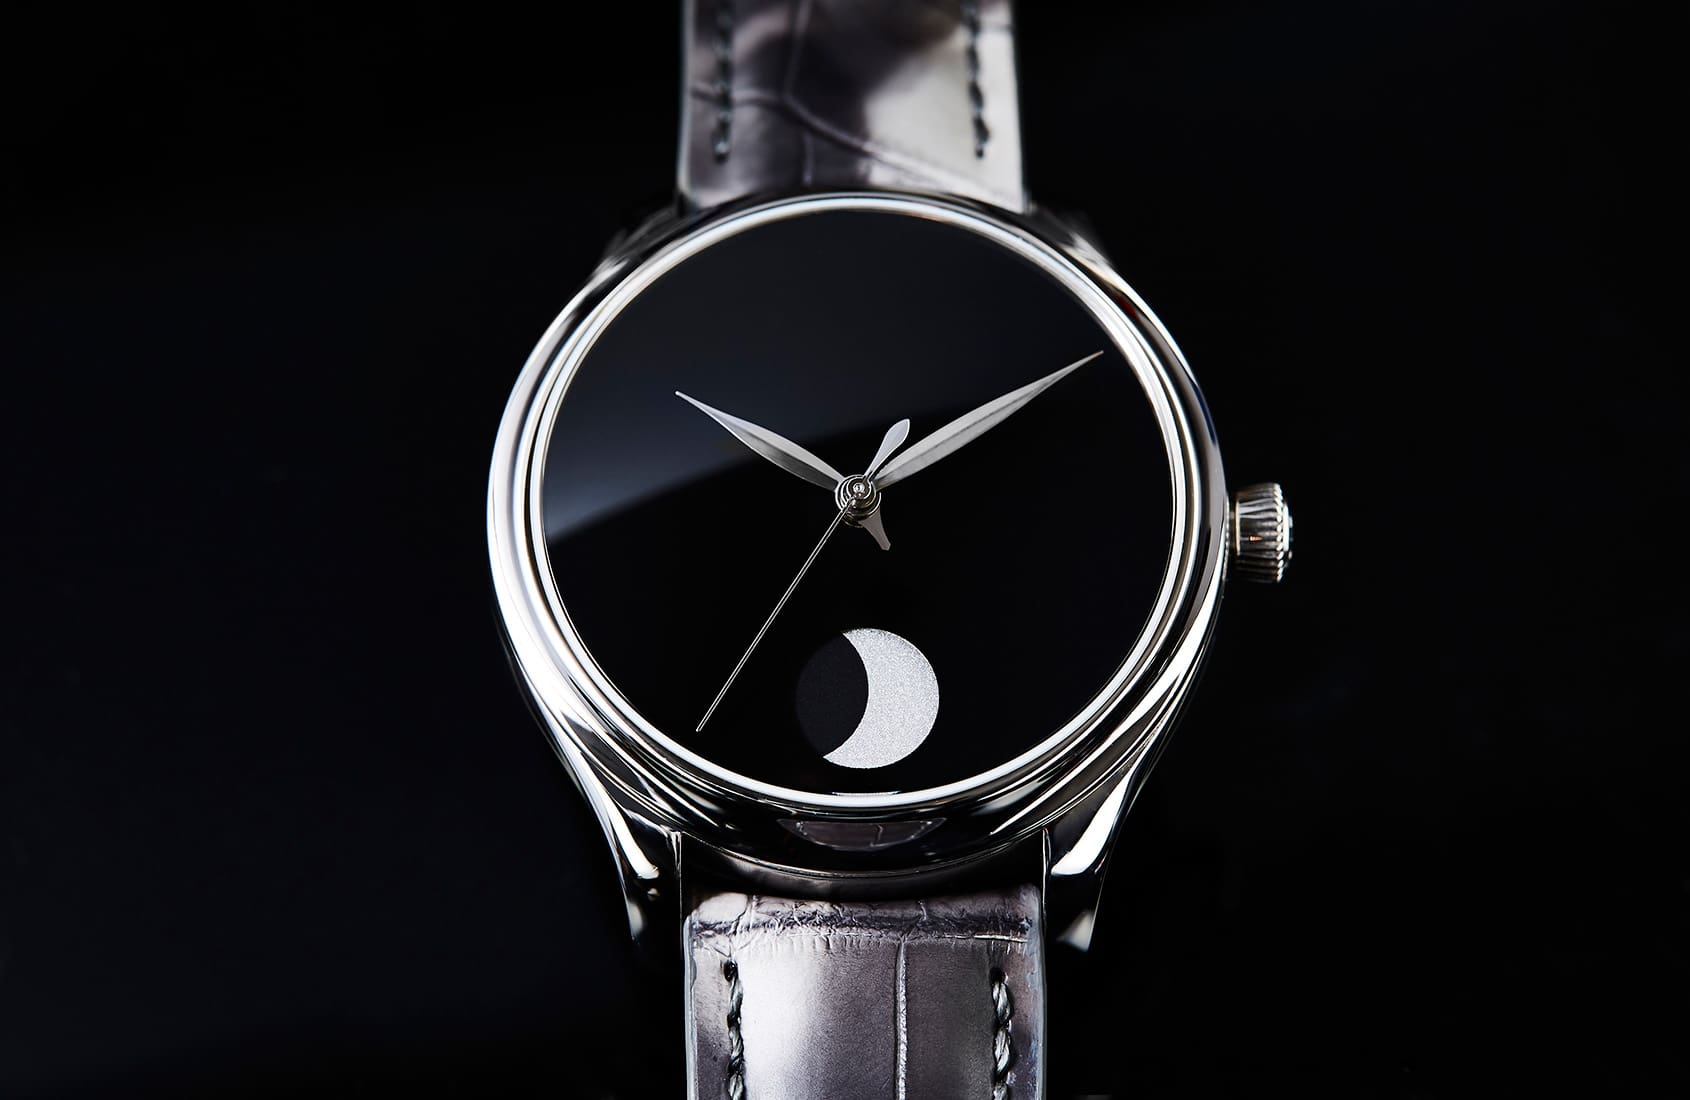 Unfathomably inky – Moser’s Endeavour Perpetual Moon Concept